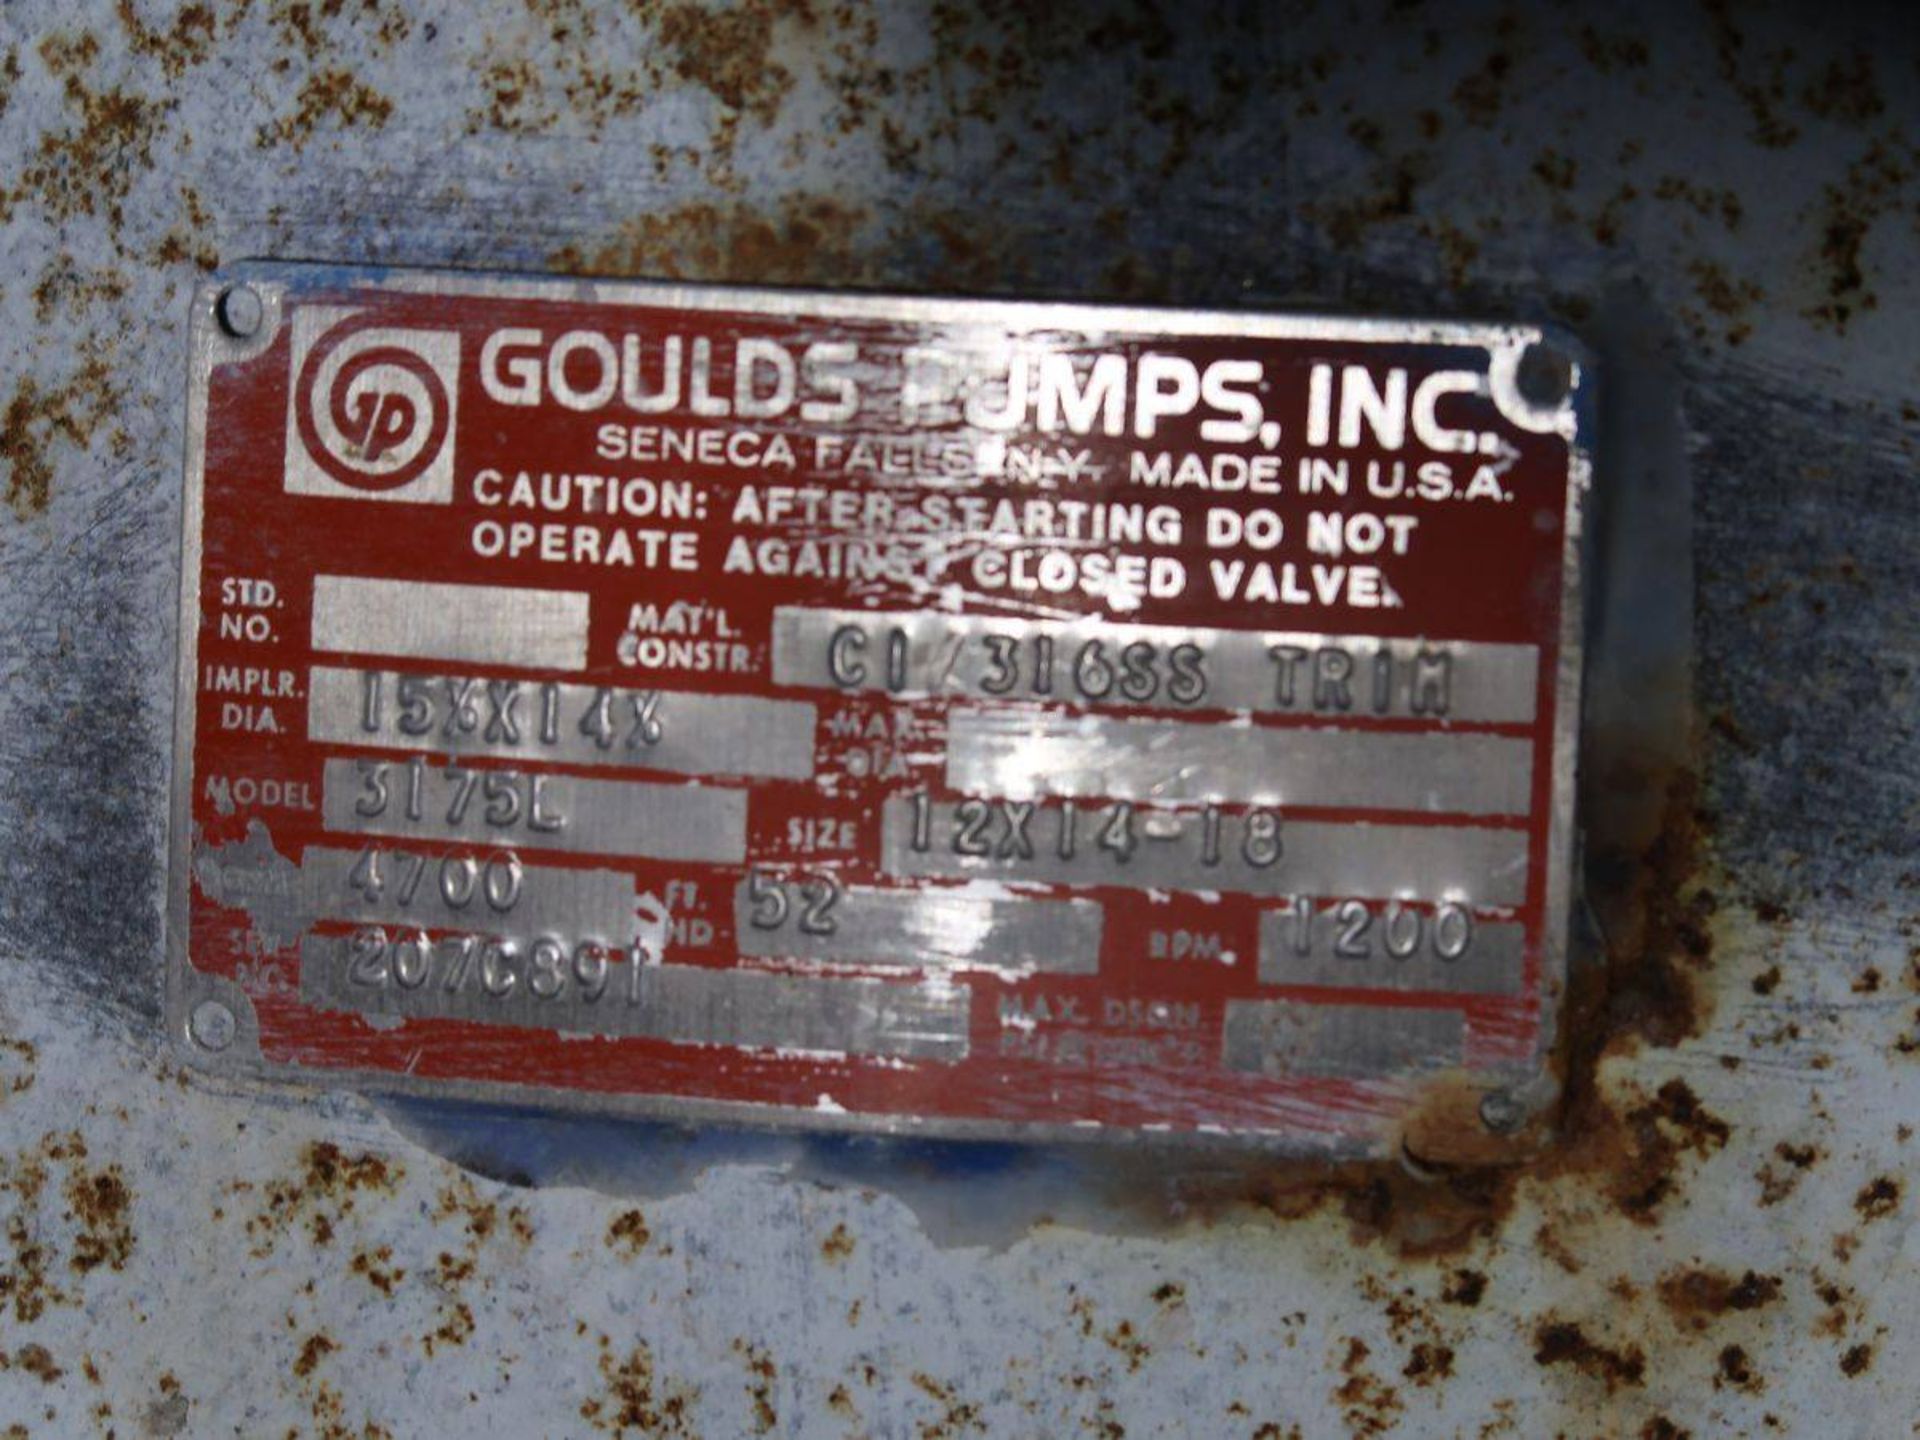 1993 Goulds 3175L 12 x 14-18 Low-Pressure Clarified Water 100hp Centrifugal Pump - Image 3 of 5